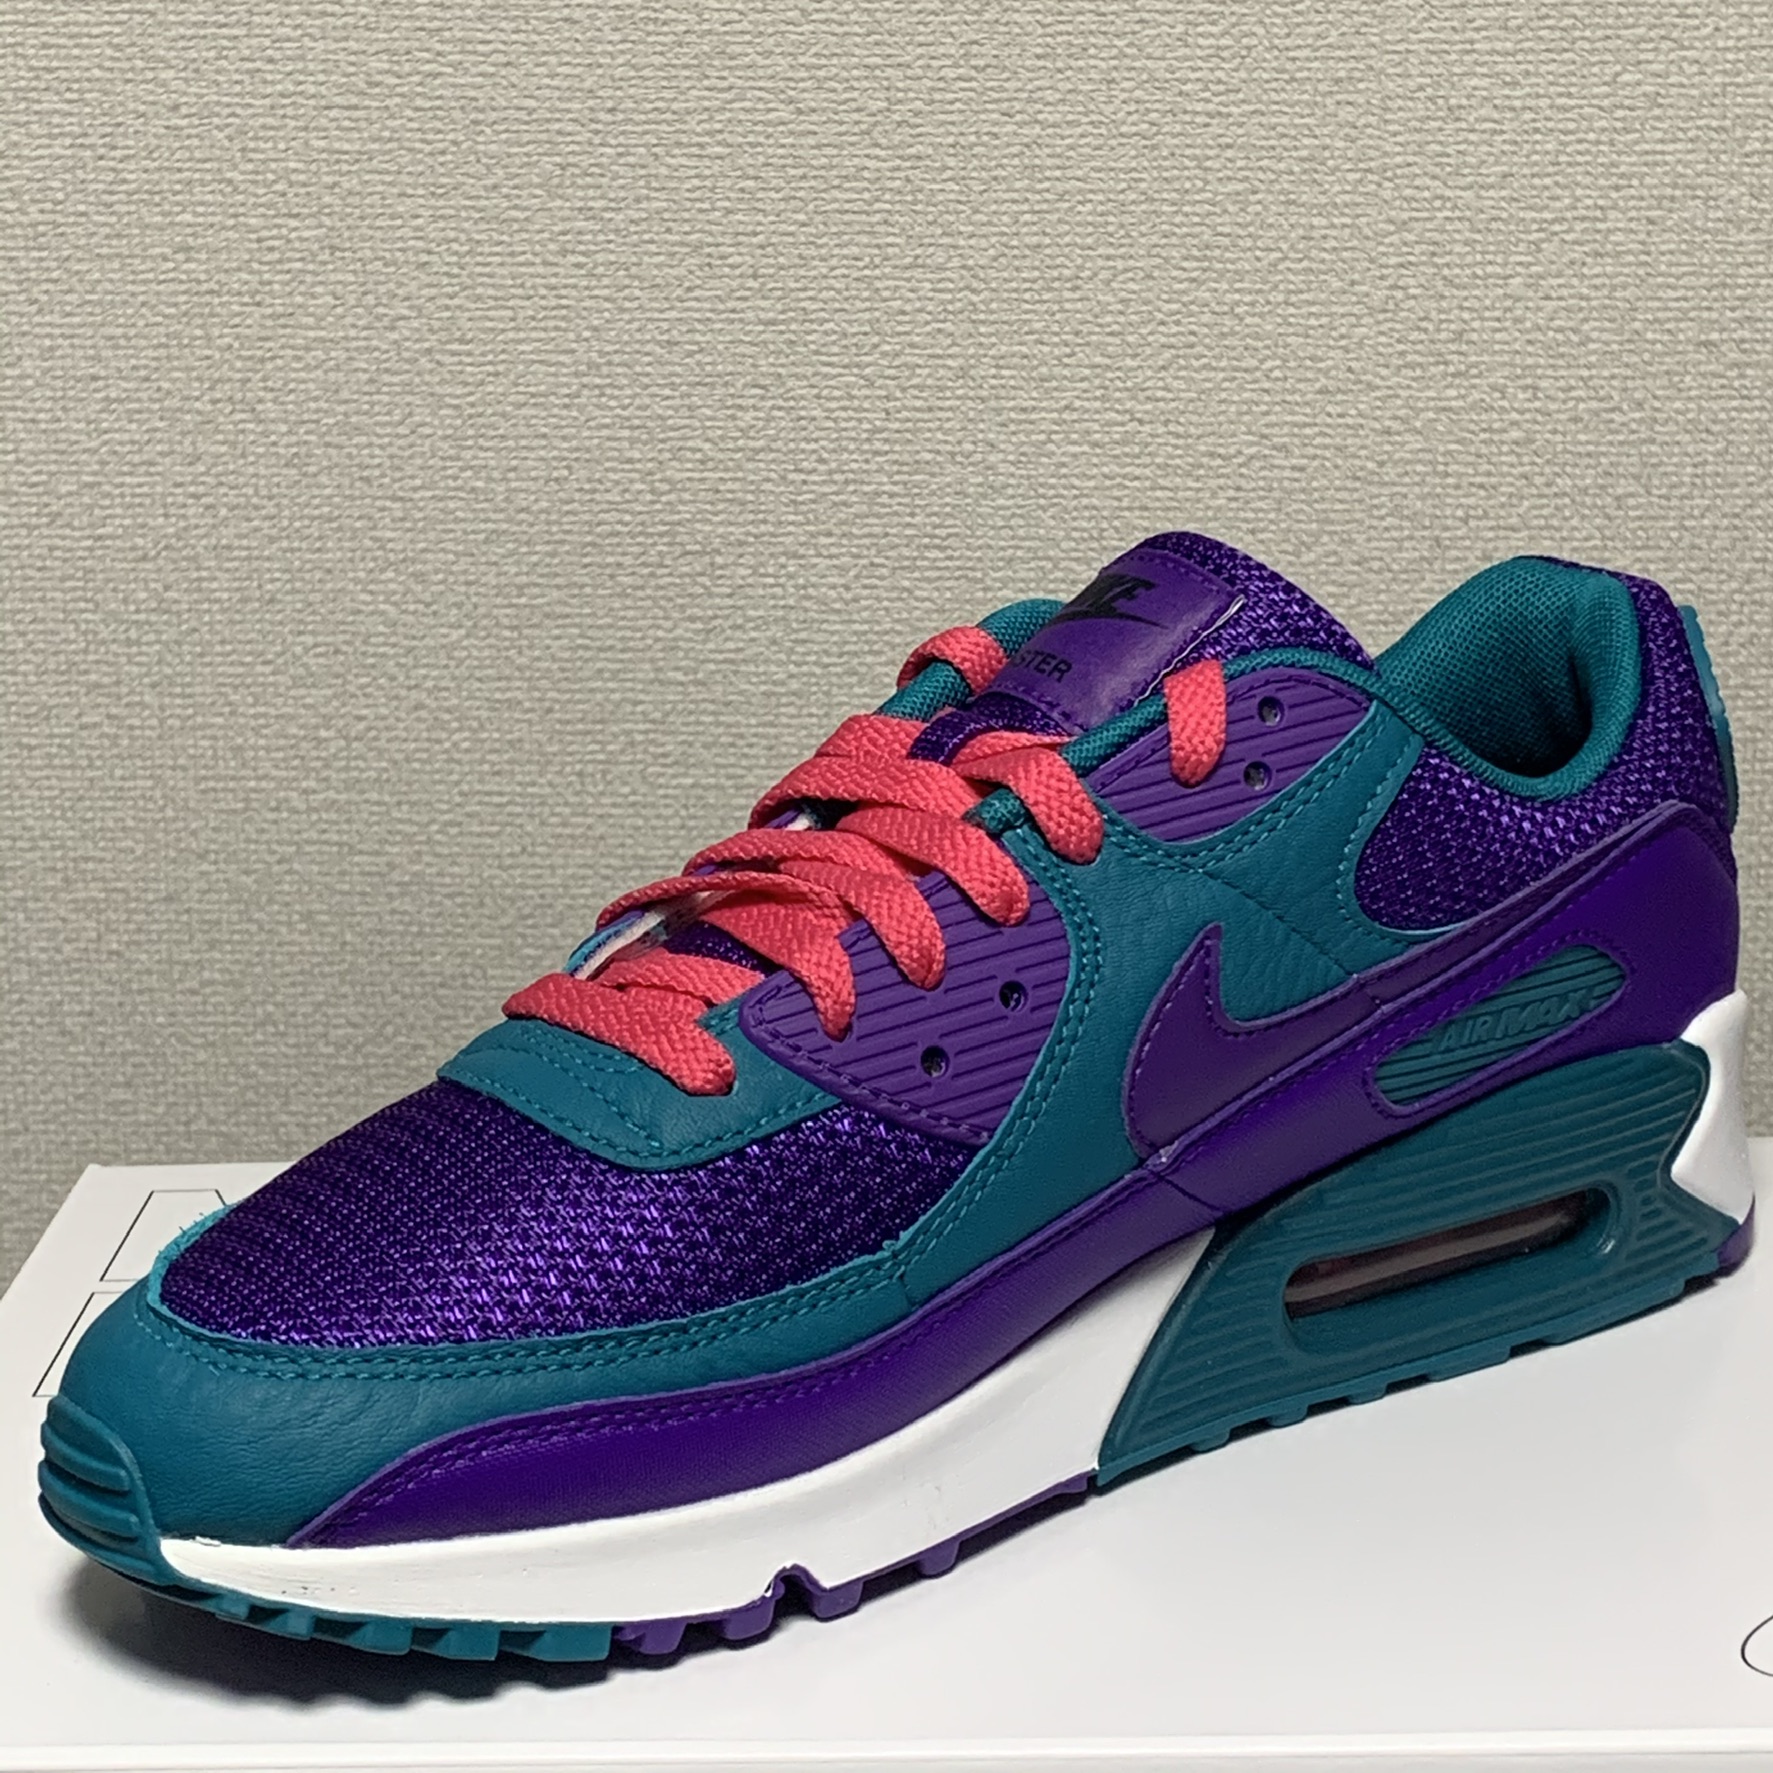 Nike Air Max 90 Performance Review - ASTERKICKS